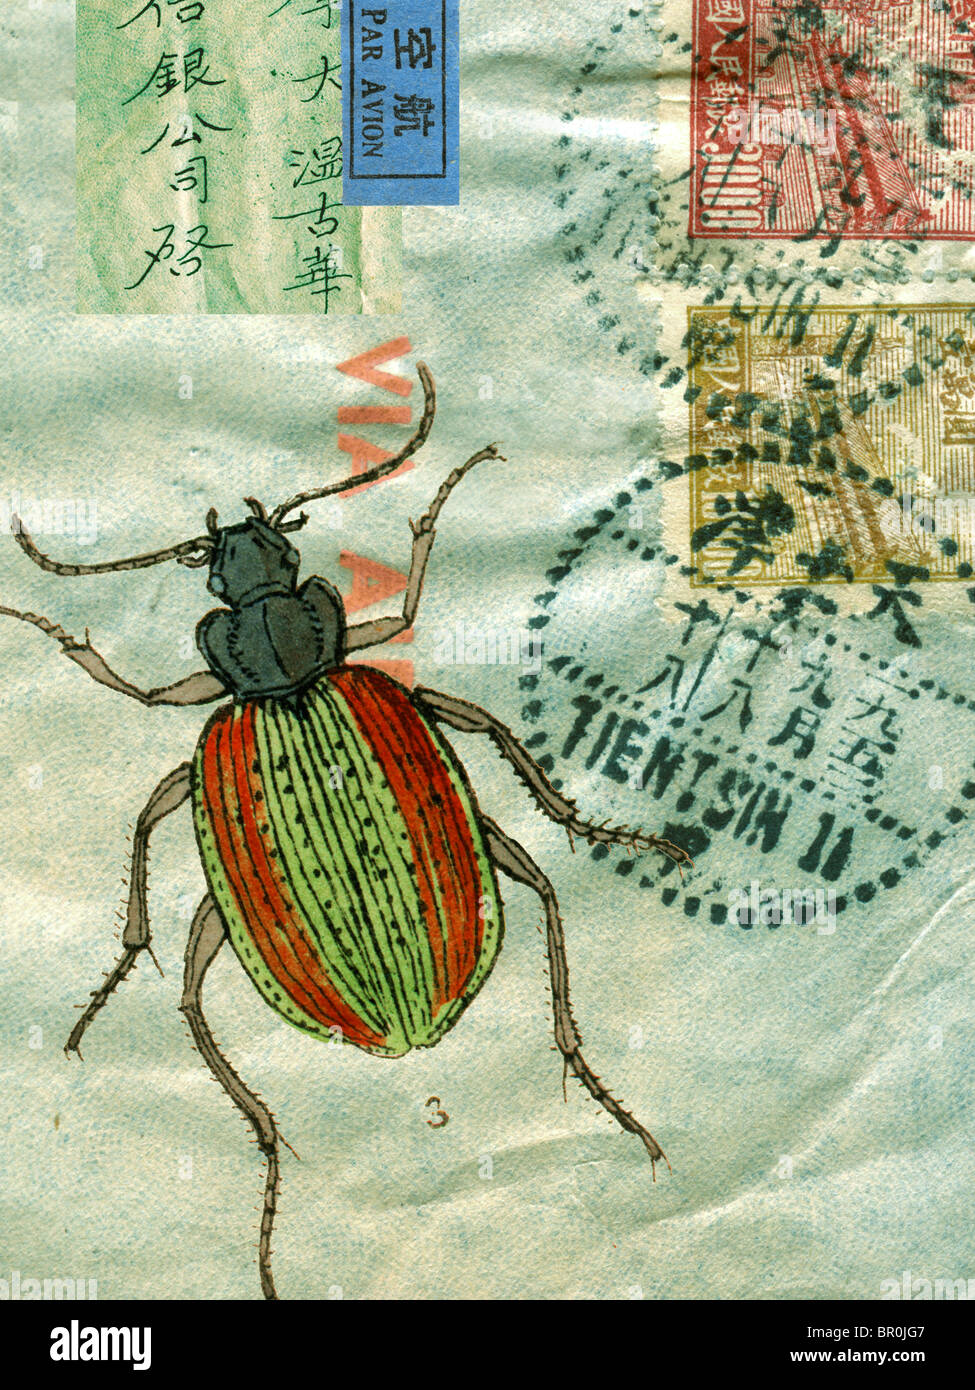 An old envelope with stamps, Chinese characters, and a beetle Stock Photo